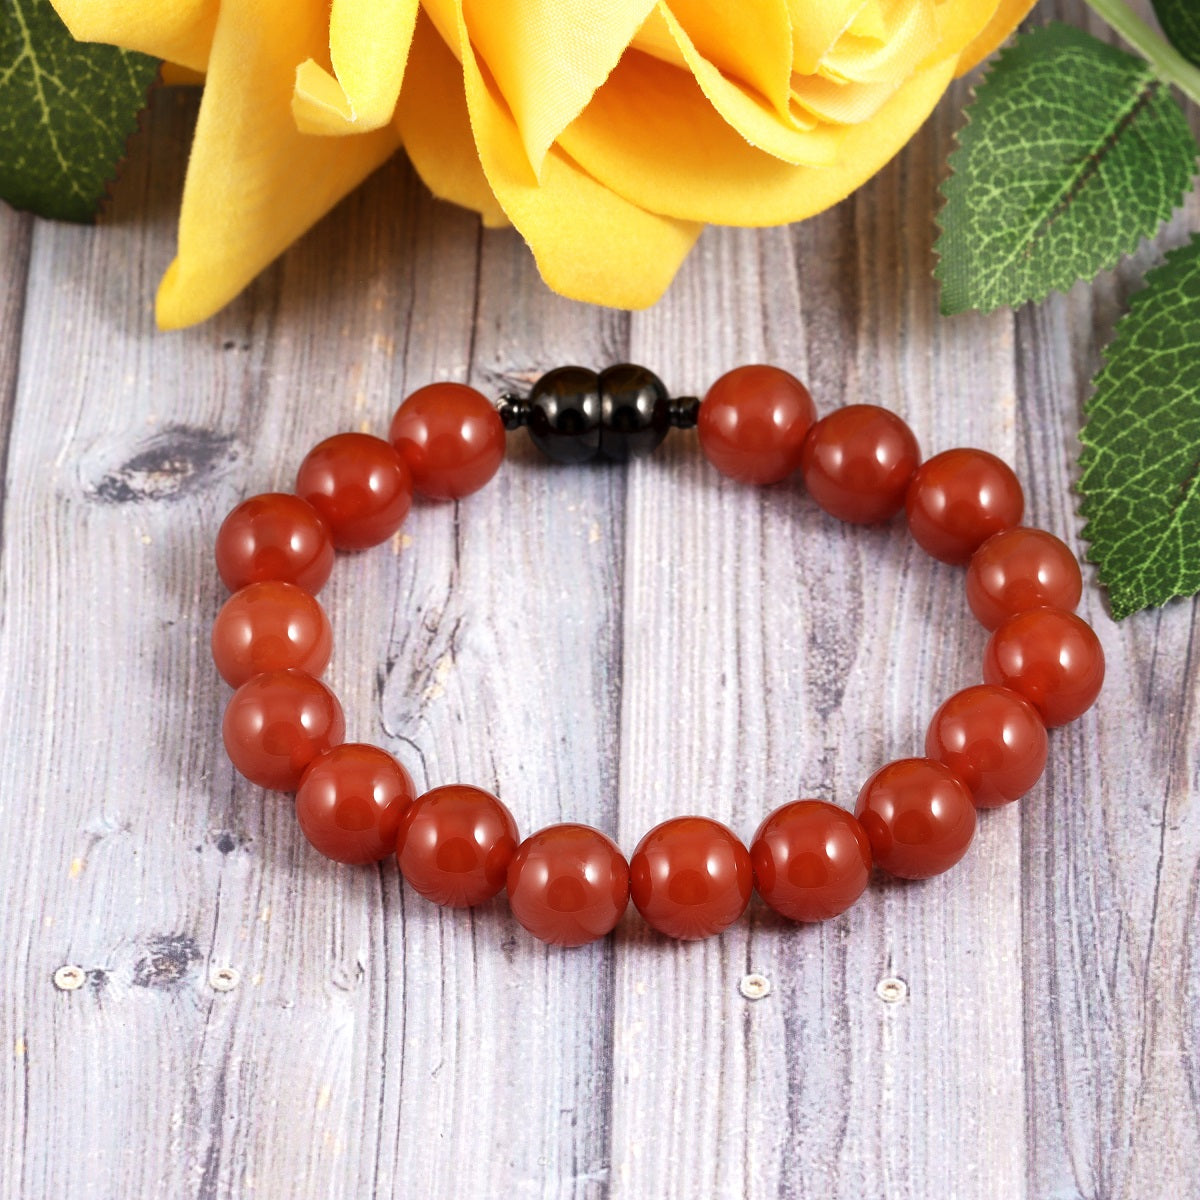 An image featuring the red onyx gemstones alongside keywords like vitality, strength, and empowerment, symbolizing their metaphysical properties.